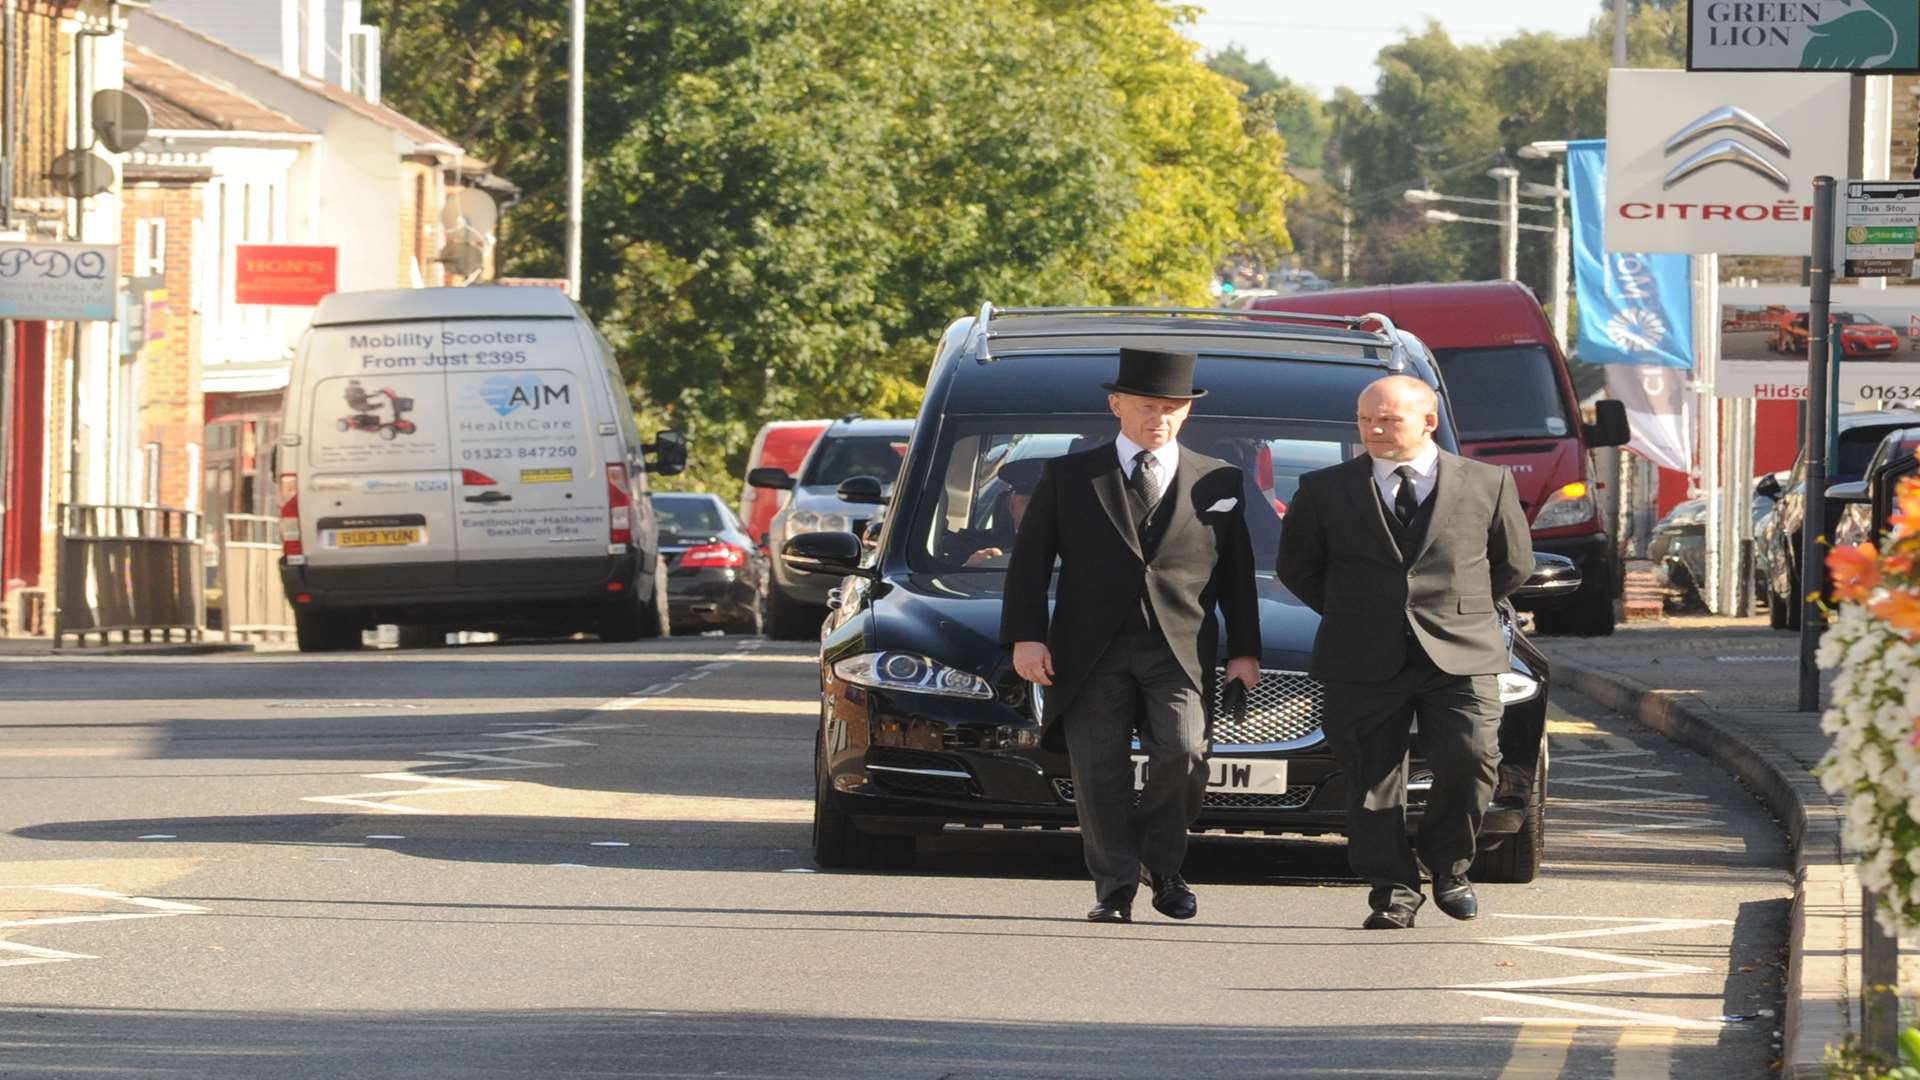 Cllr Mike O'Brien's funeral was held at St Margaret's Church in Rainham on Friday September 23